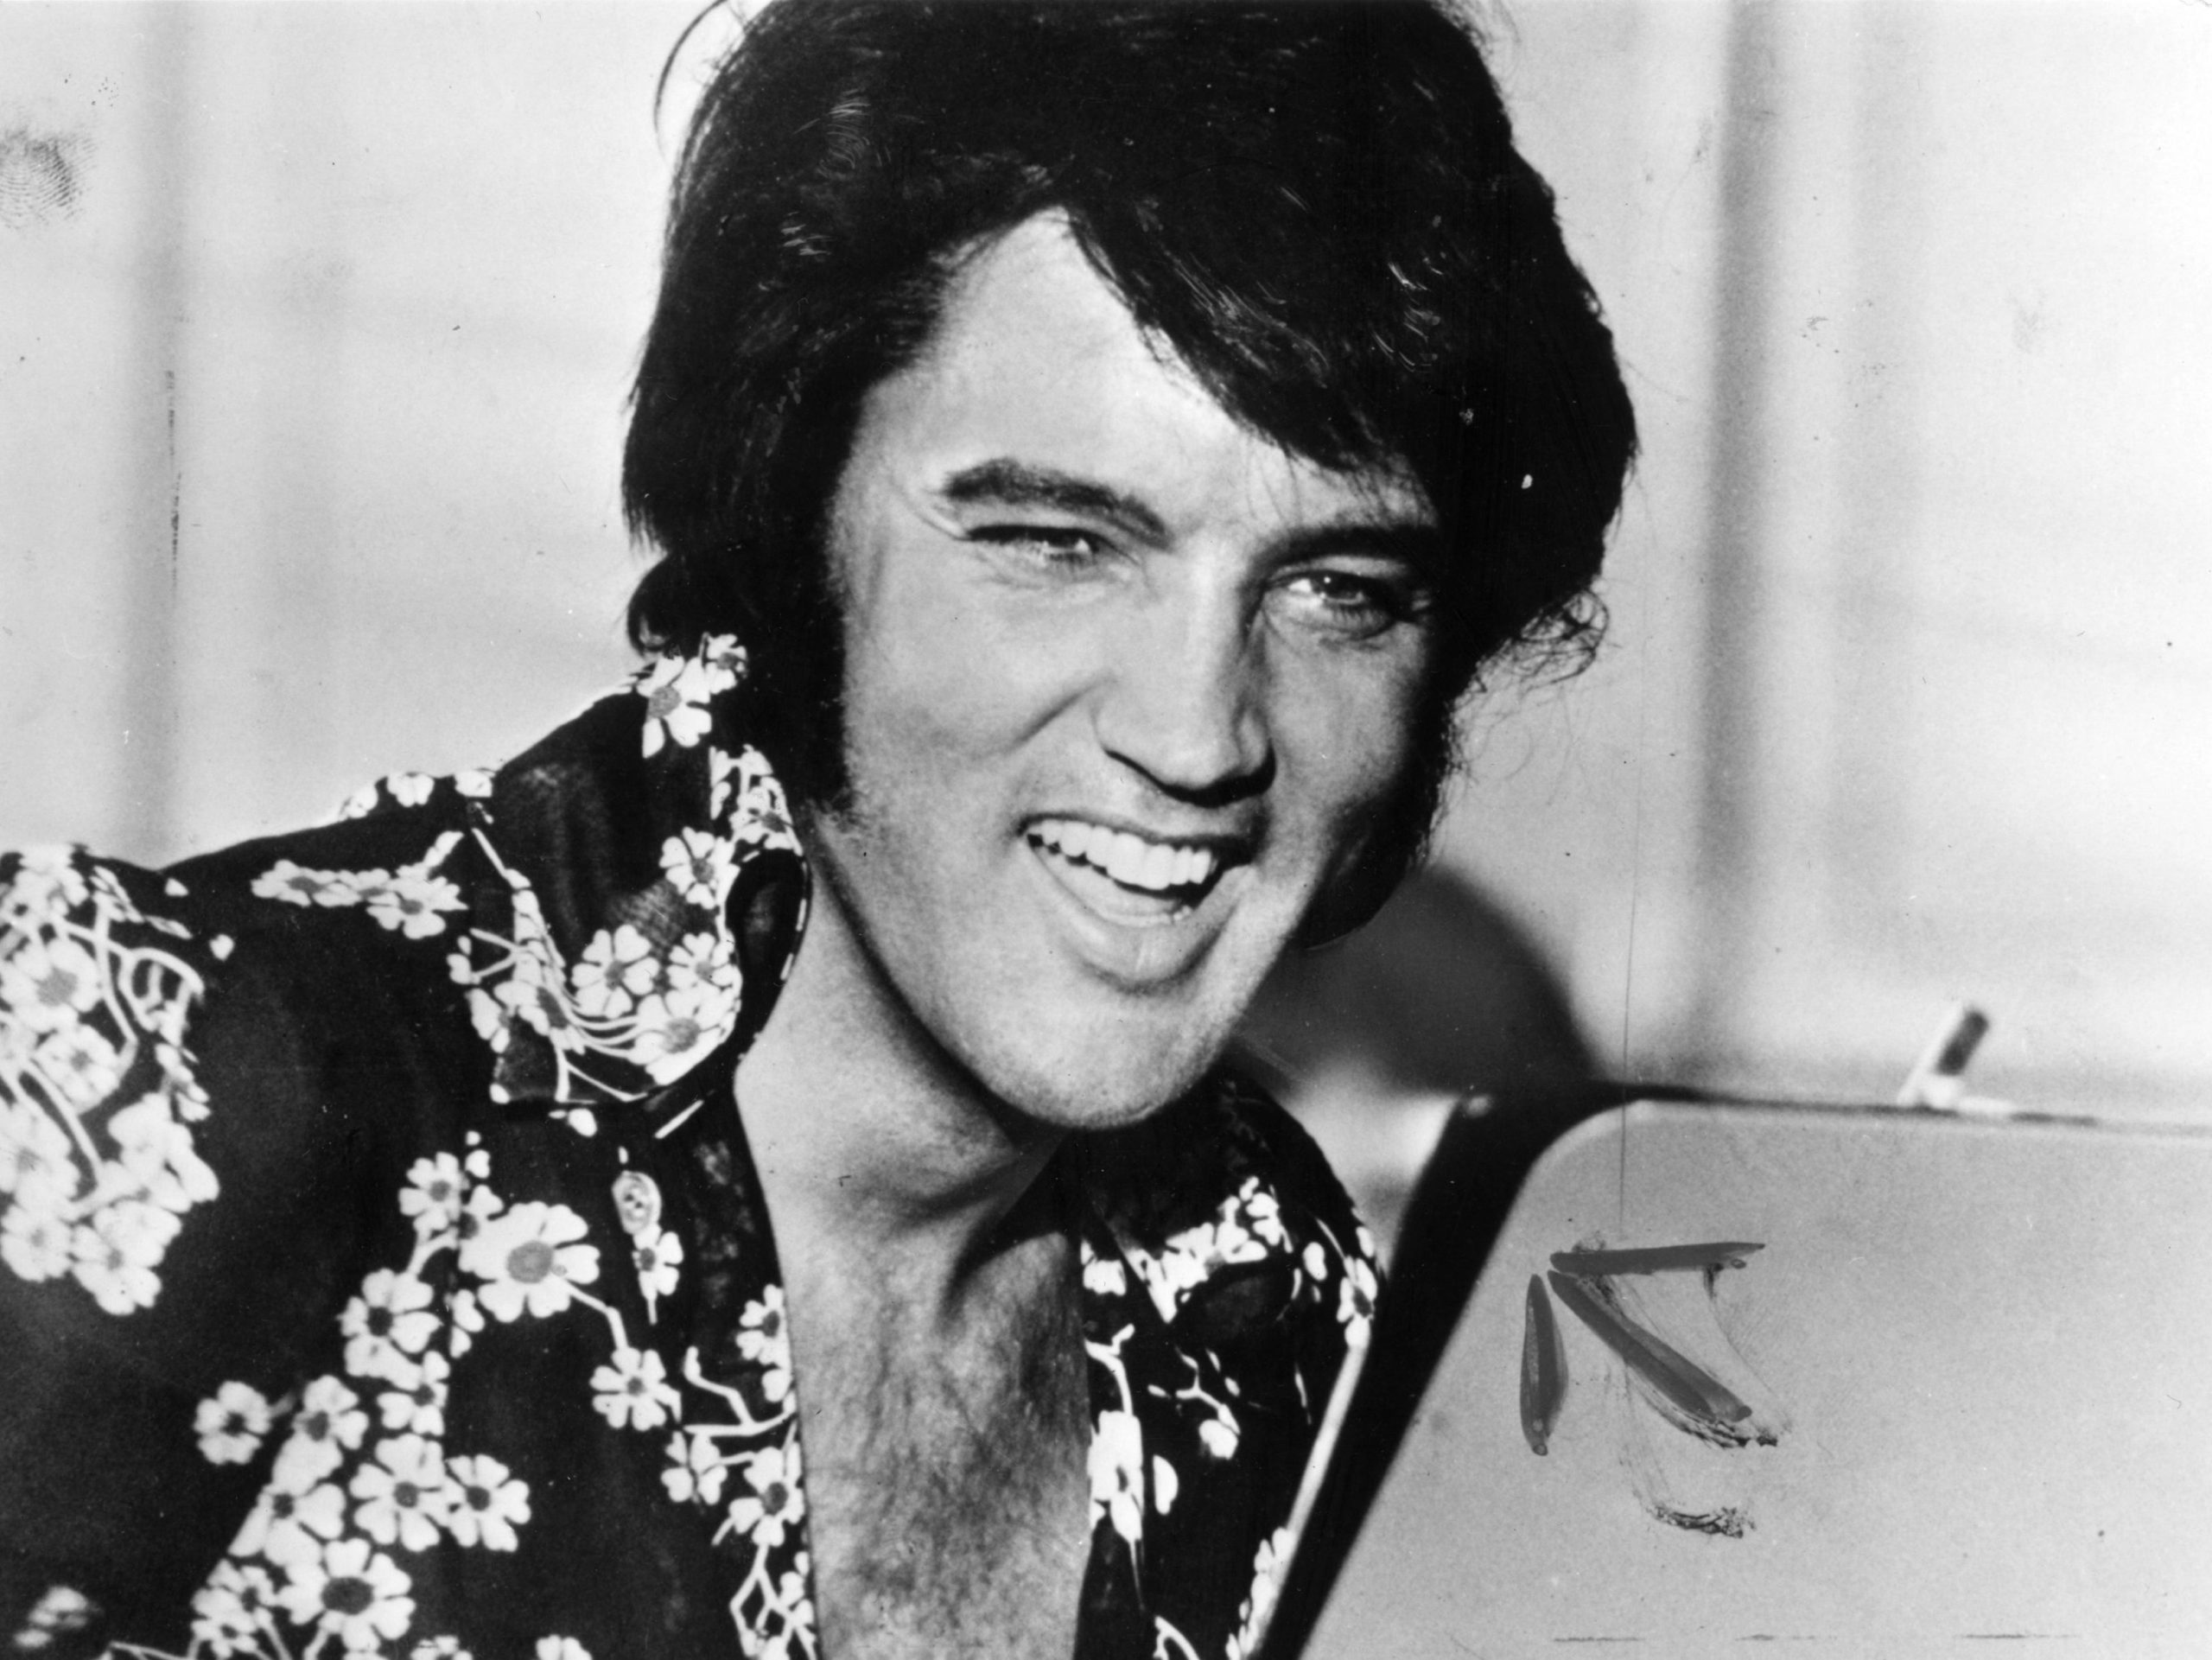 Should we still care about Elvis? | The Independent